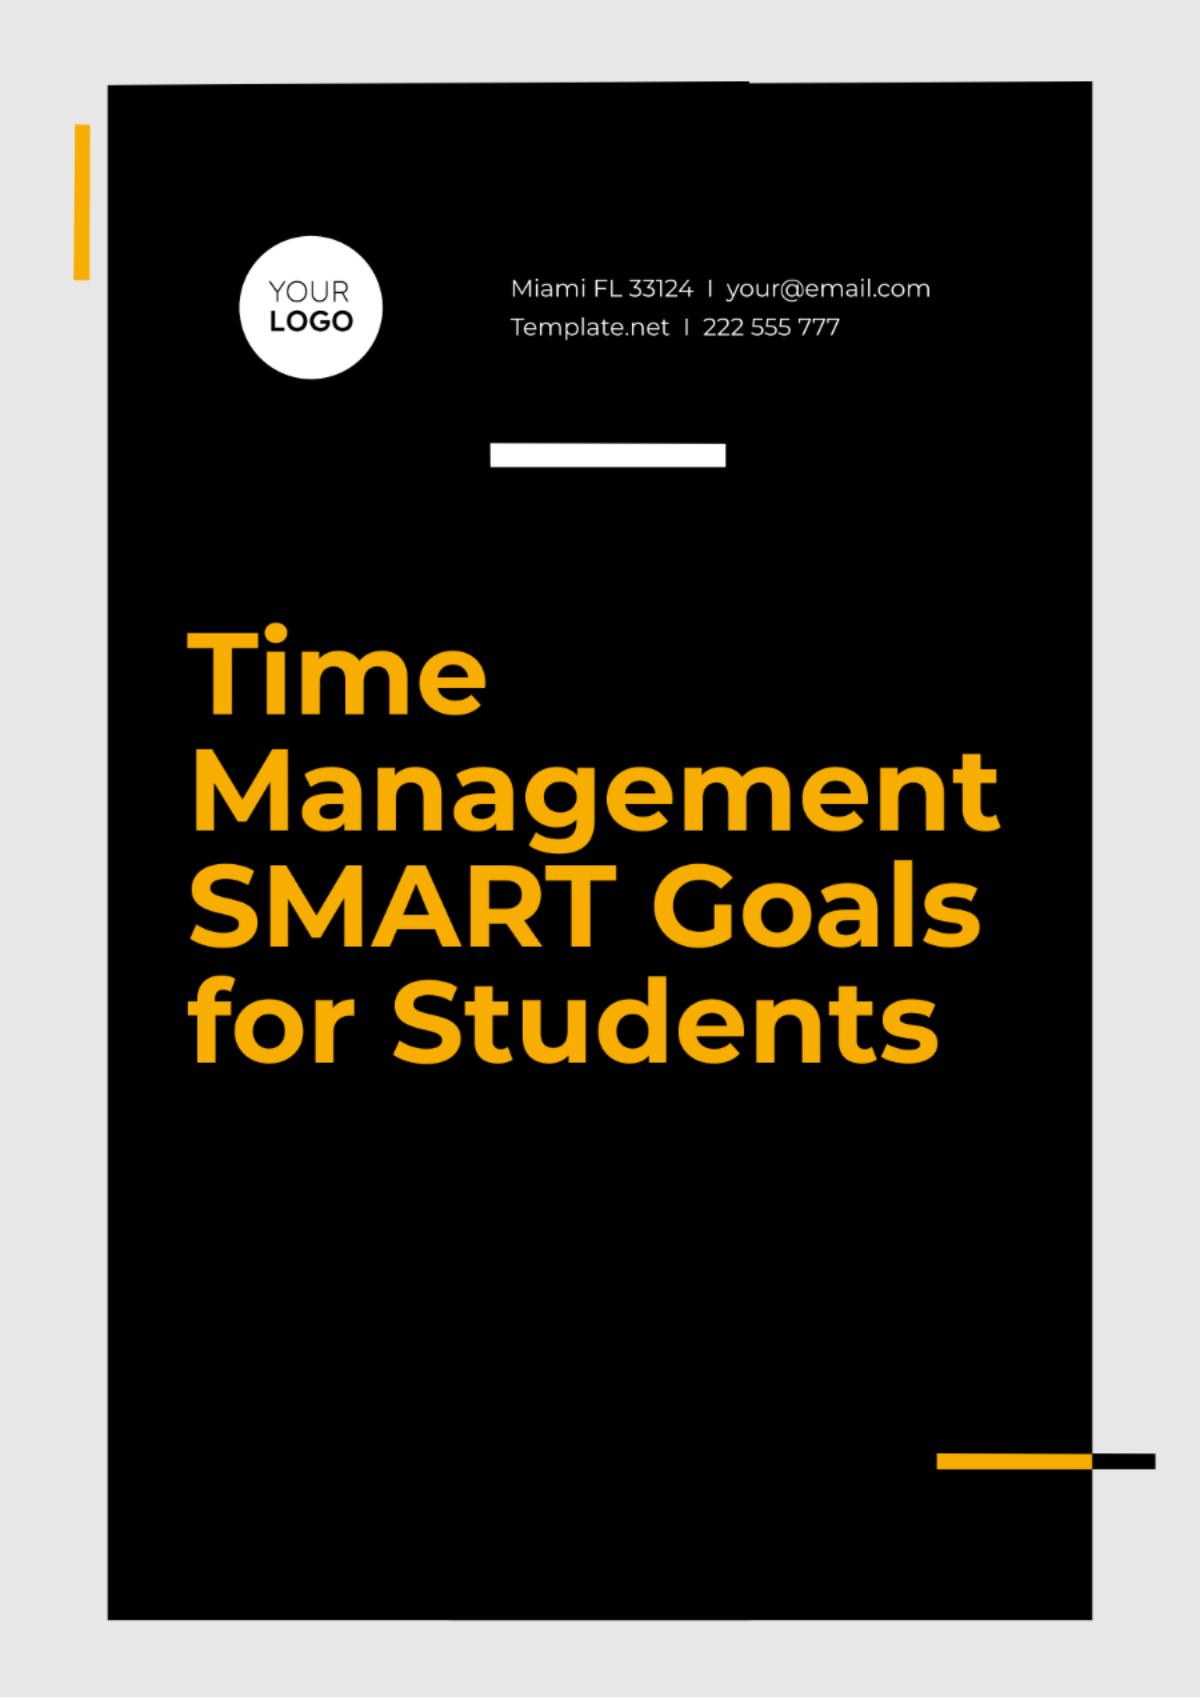 Time Management SMART Goals for Students Template